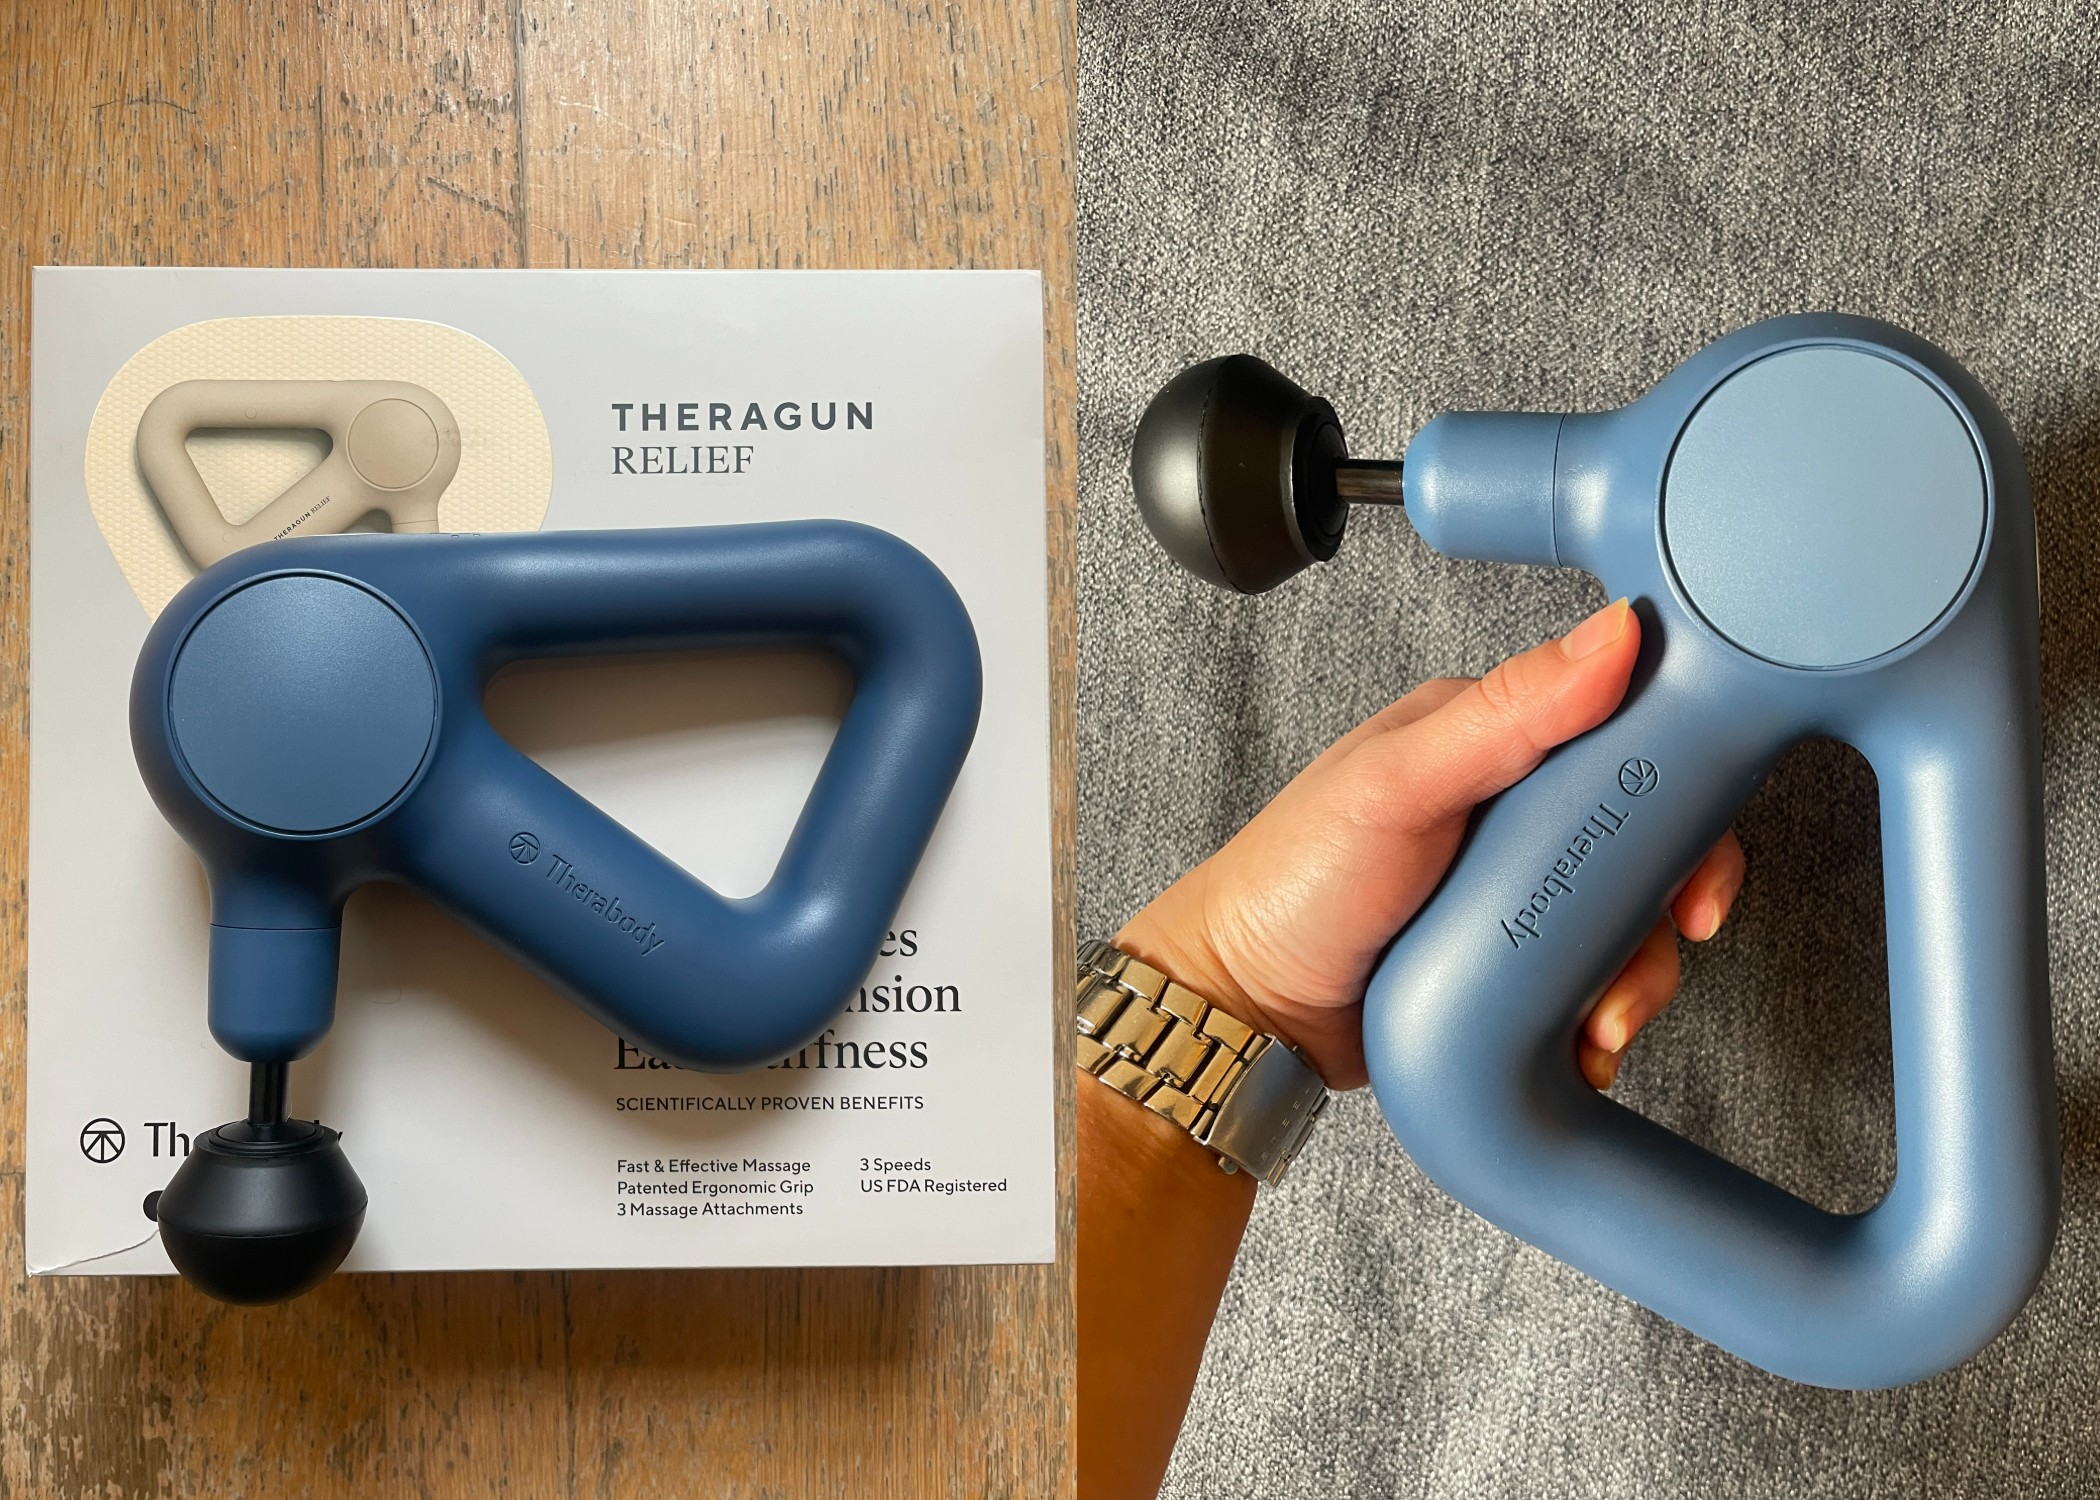 Theragun Relief is designed for everyday movement.